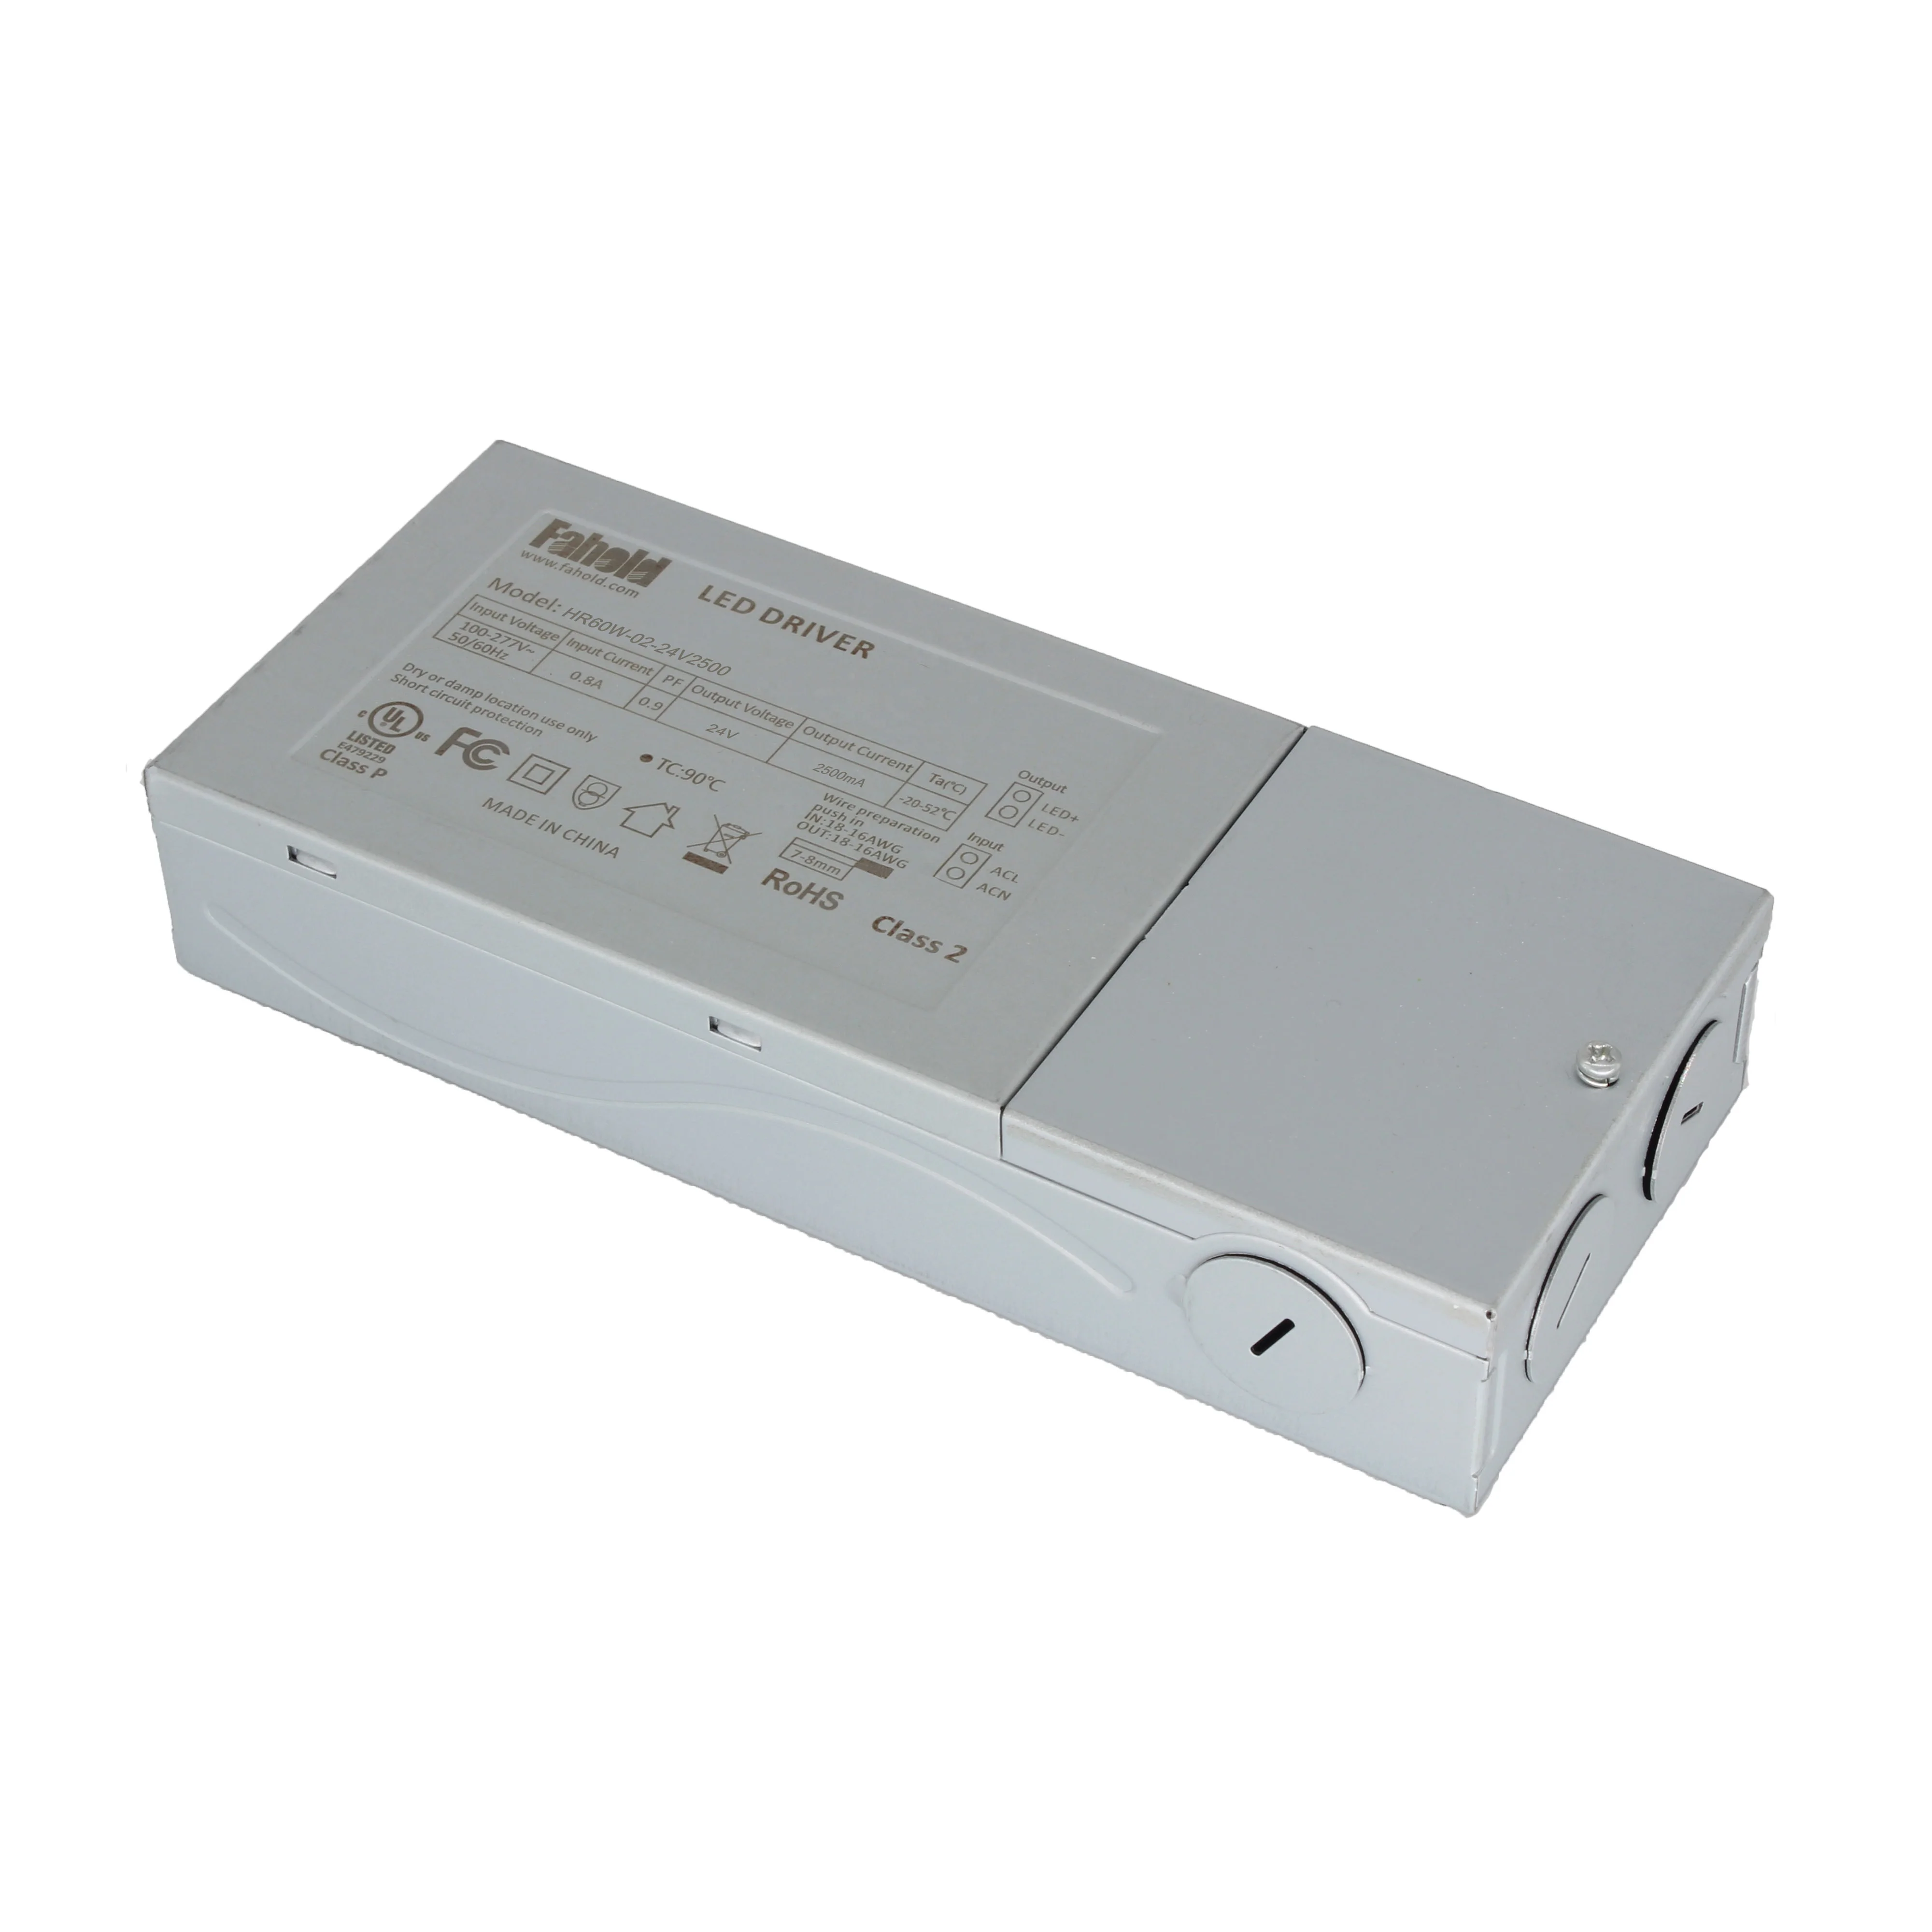 40-100W Junction Box Constant Voltage 24V 12V Triac dimmable led driver for strips light, wall light, Phase cut Dimming